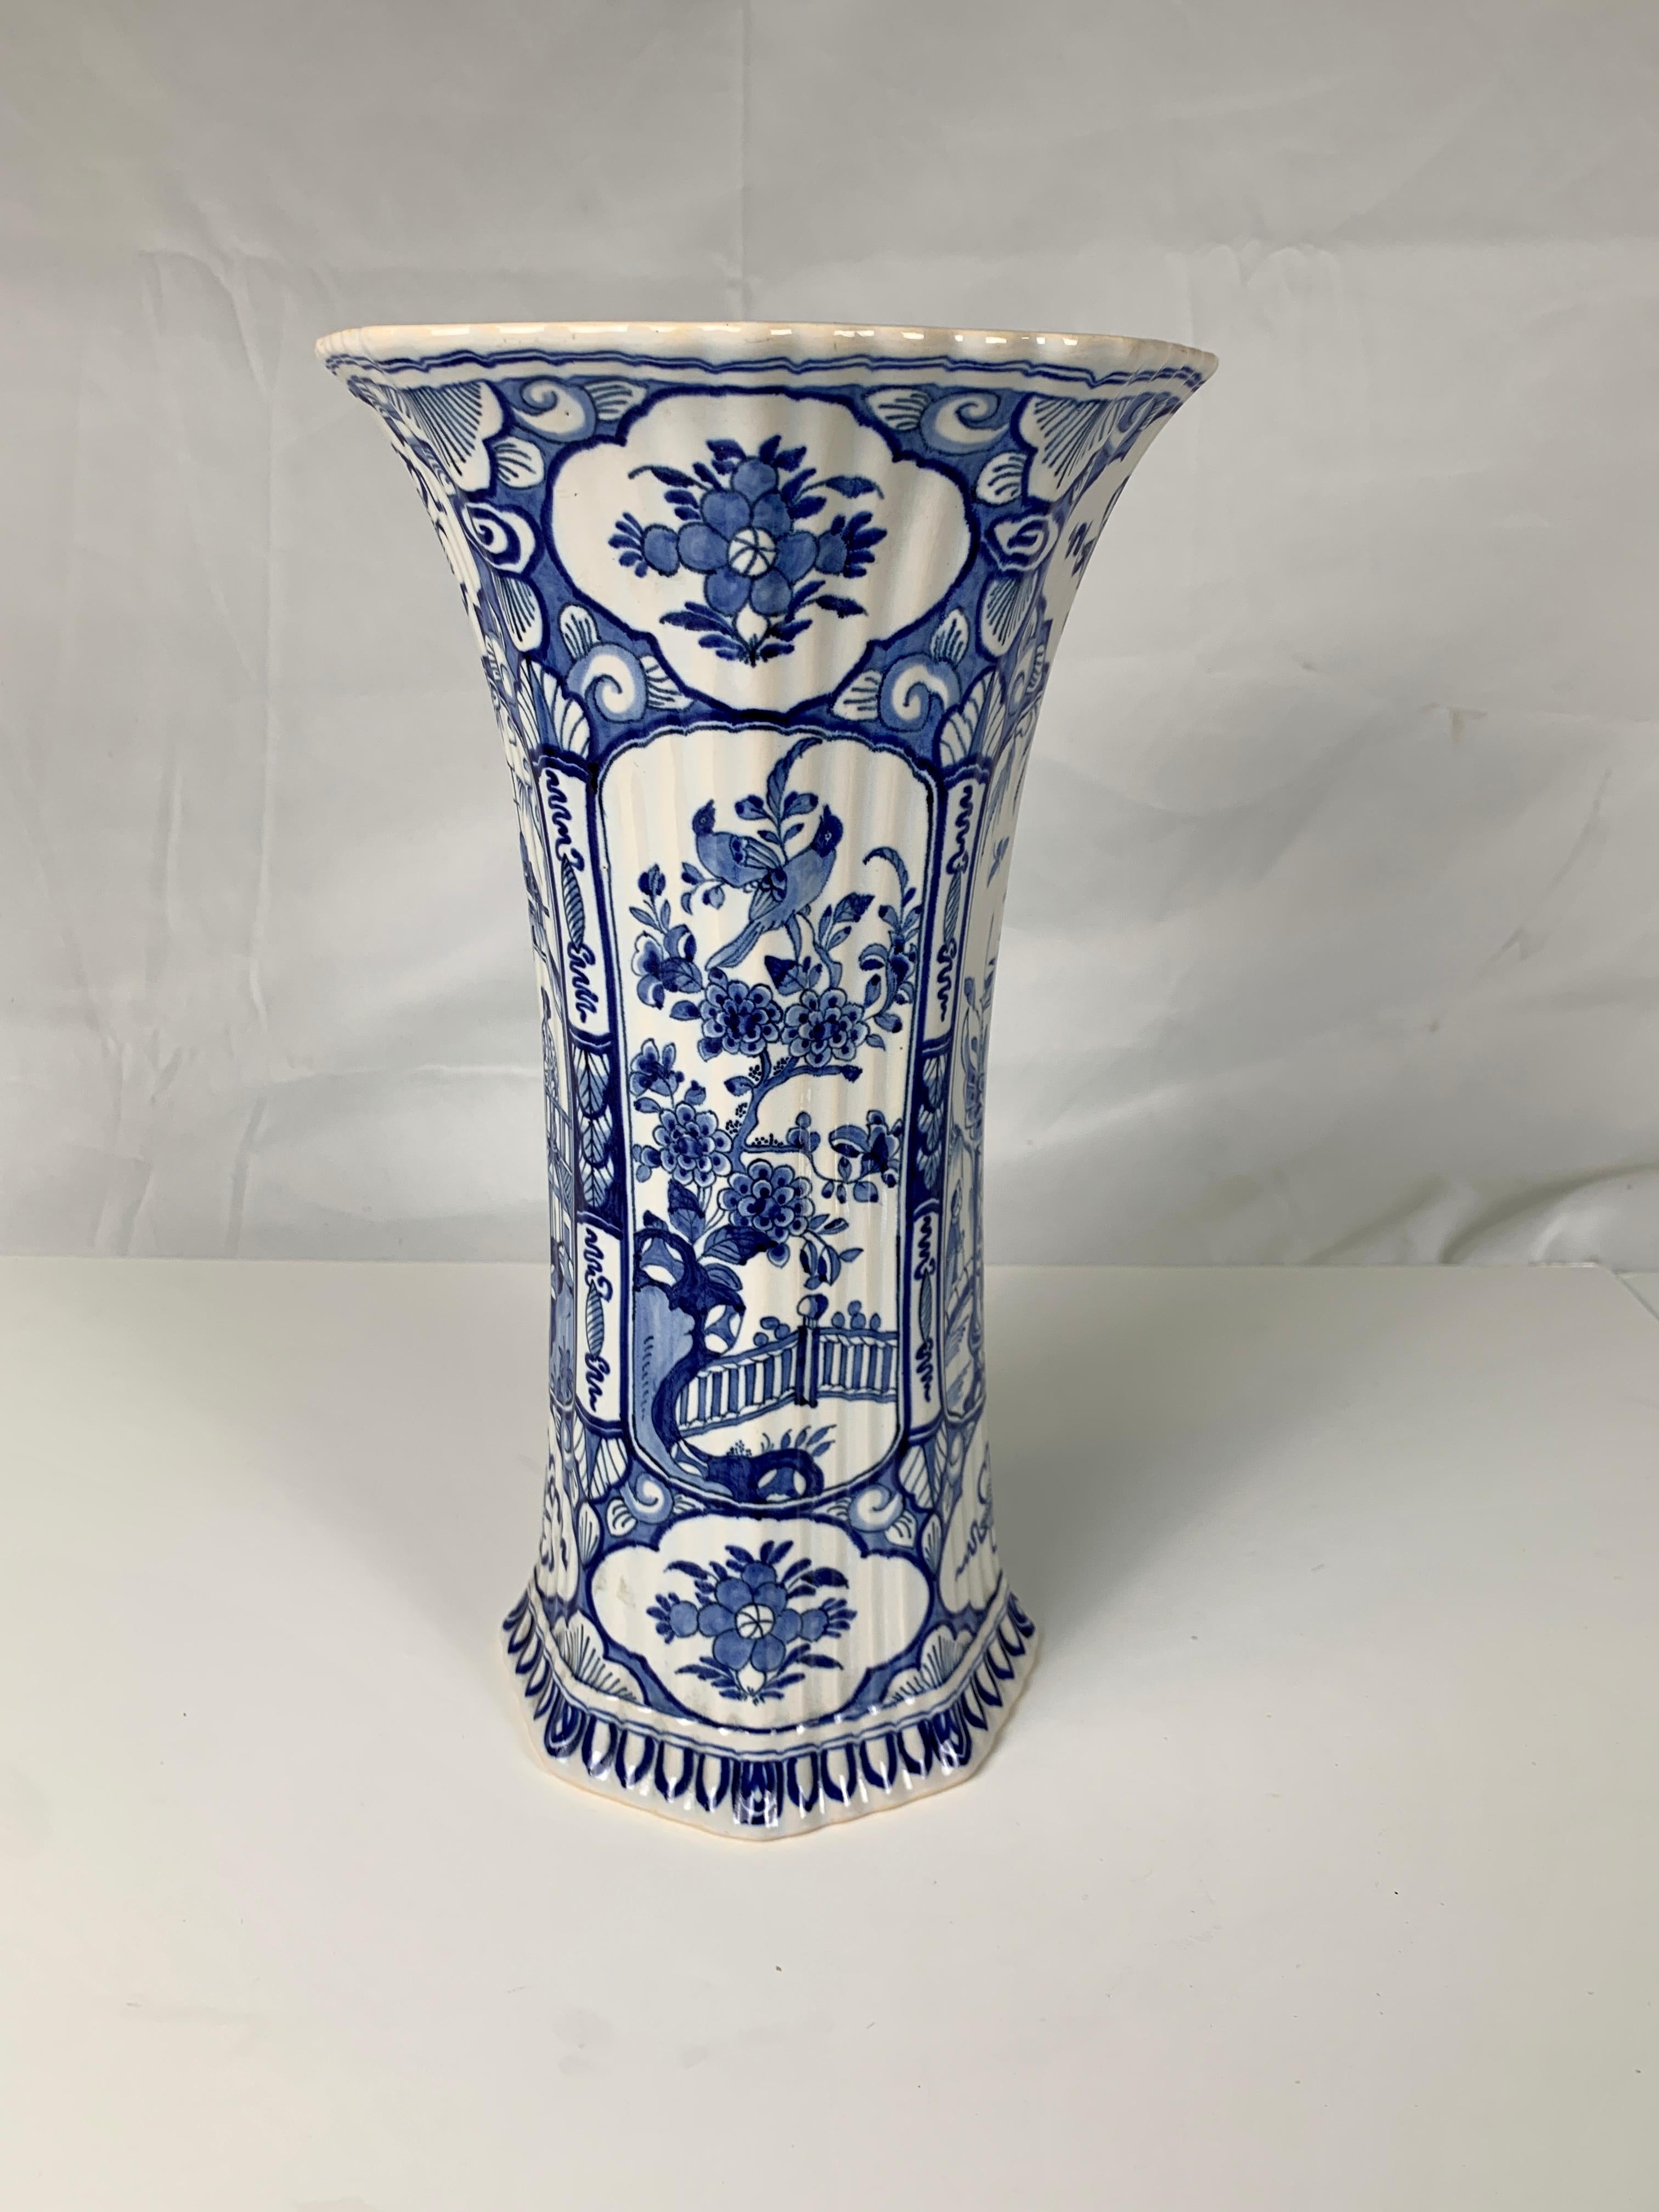 Group of Large Dutch Delft Jars and Vases 18th-19th and 20th Centuries 4